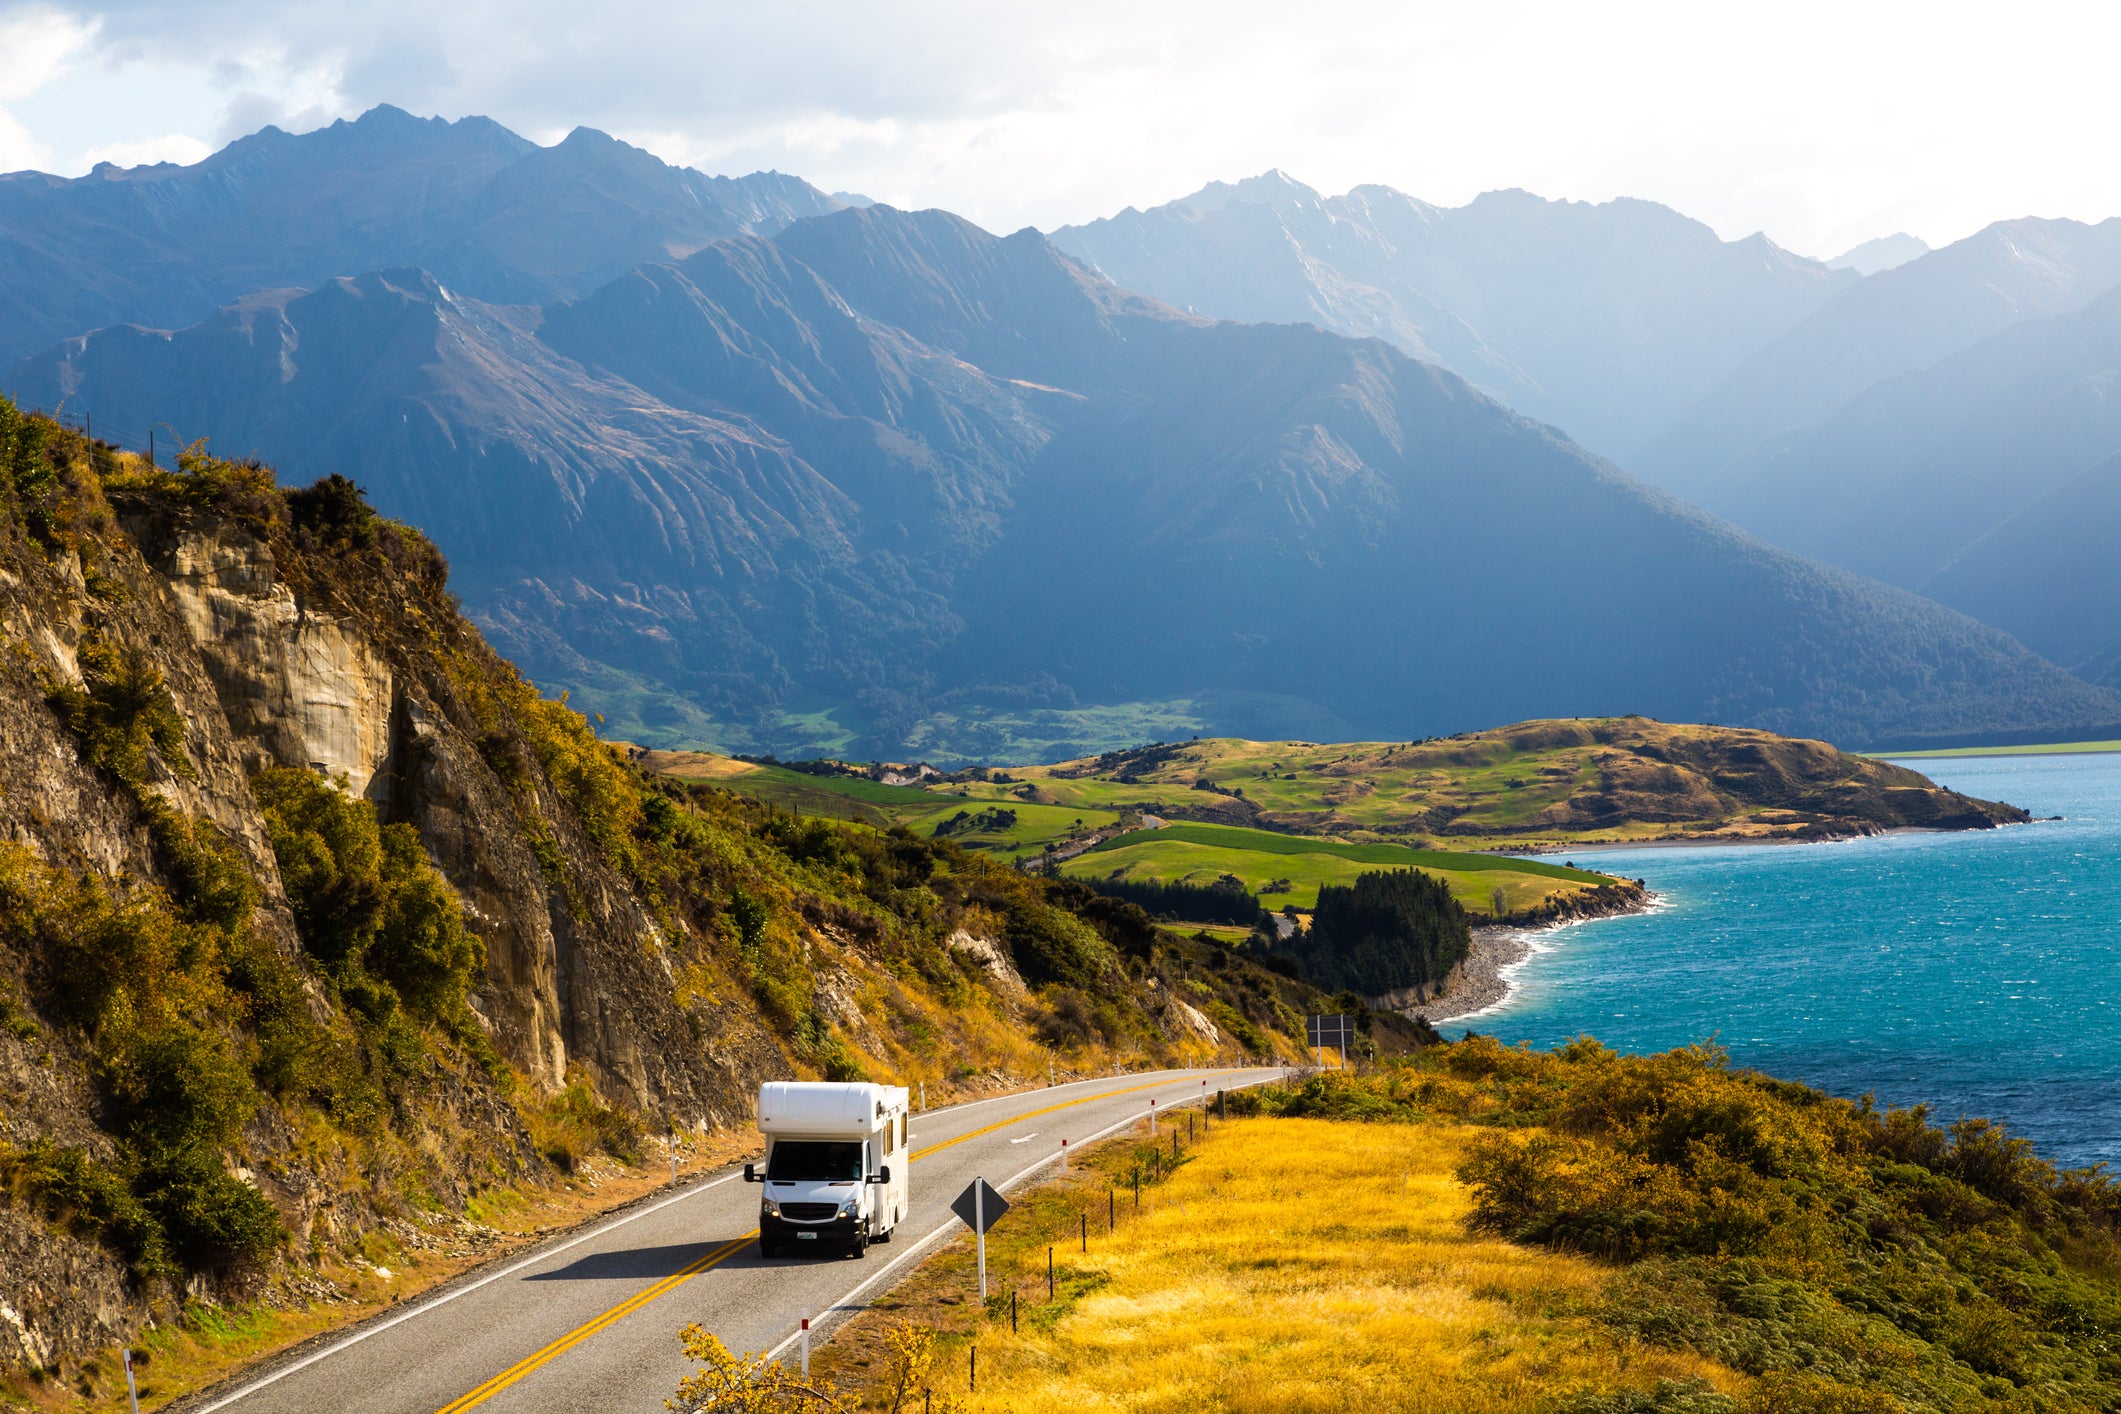 Glaciers, beaches and vineyards: The perfect New Zealand South Island road trip